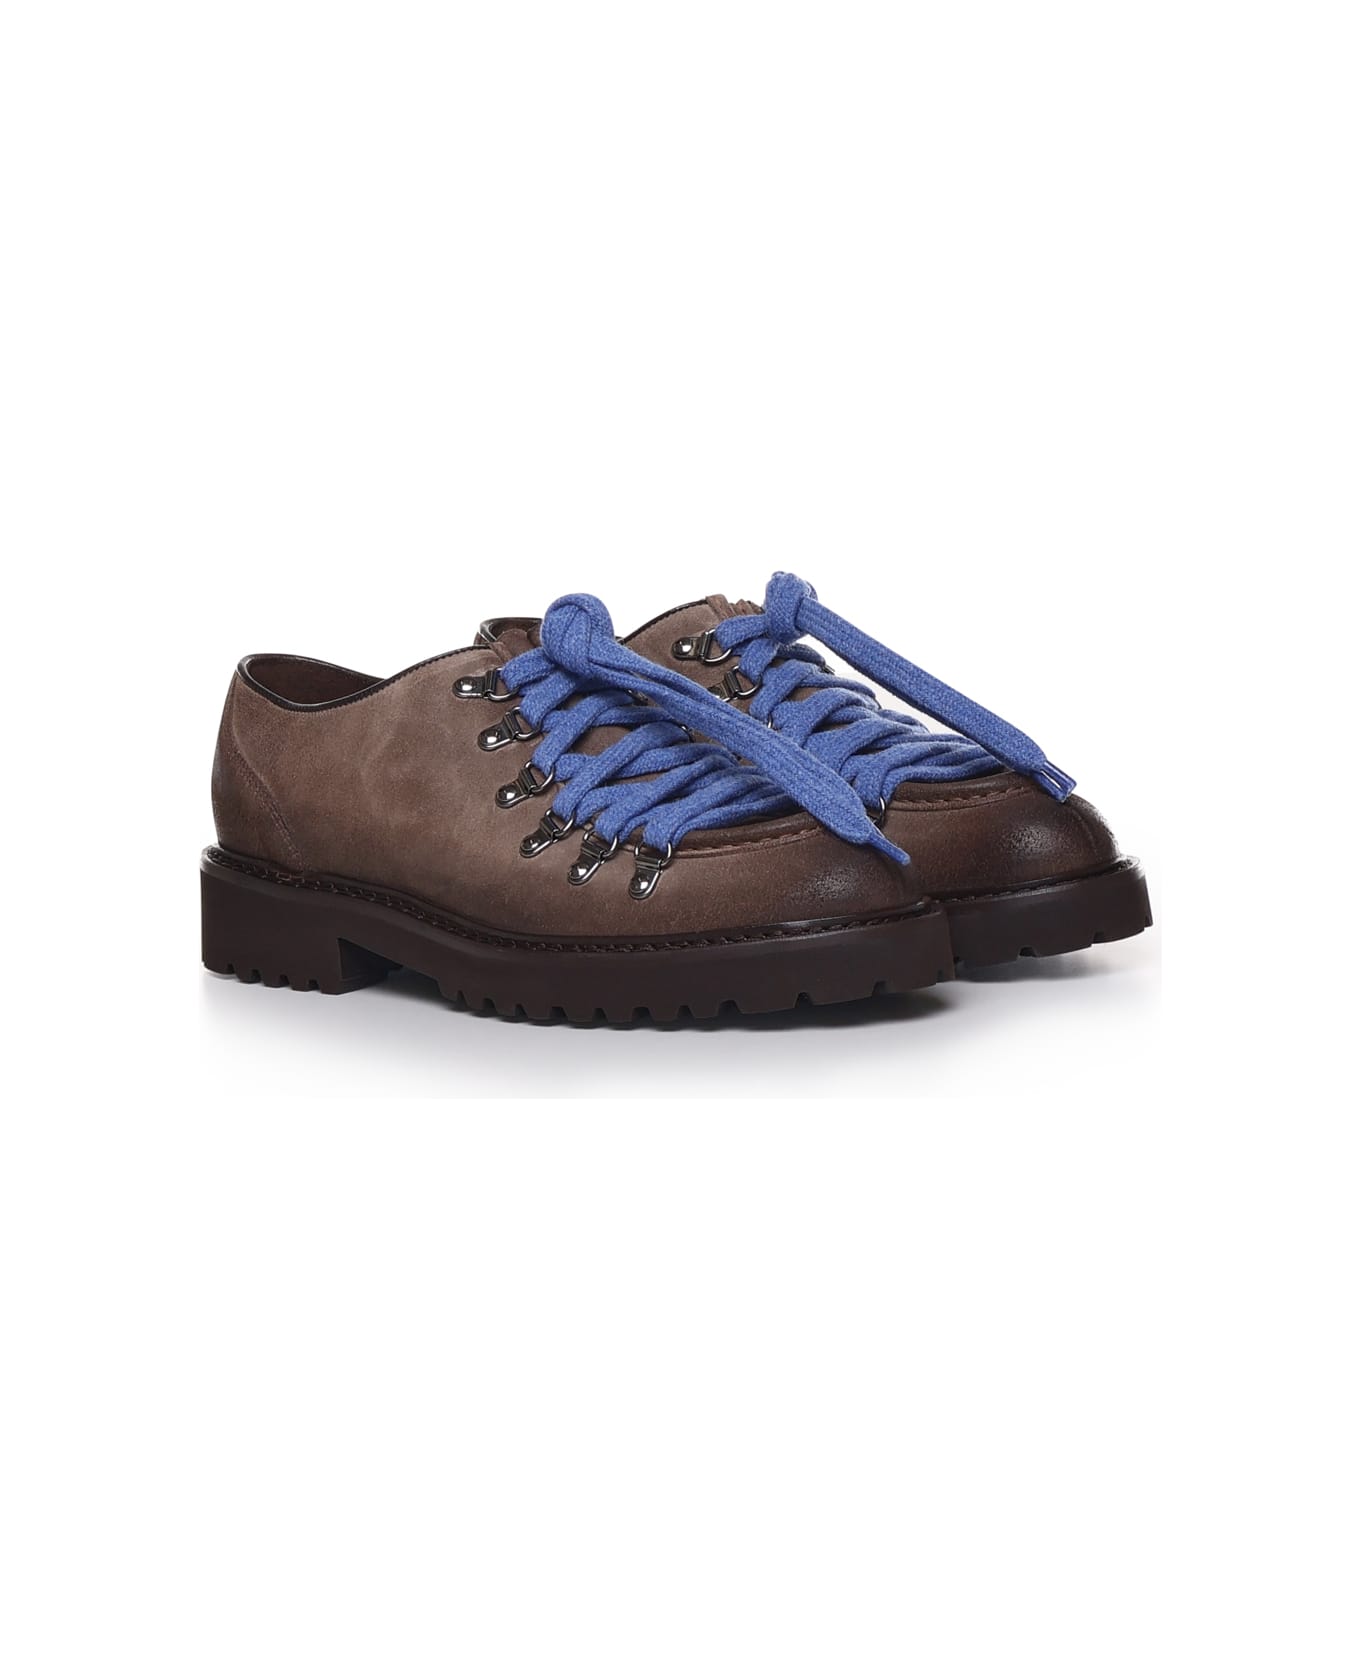 Doucal's Lace-up Shoes In Smooth Calfskin - Brown, blue